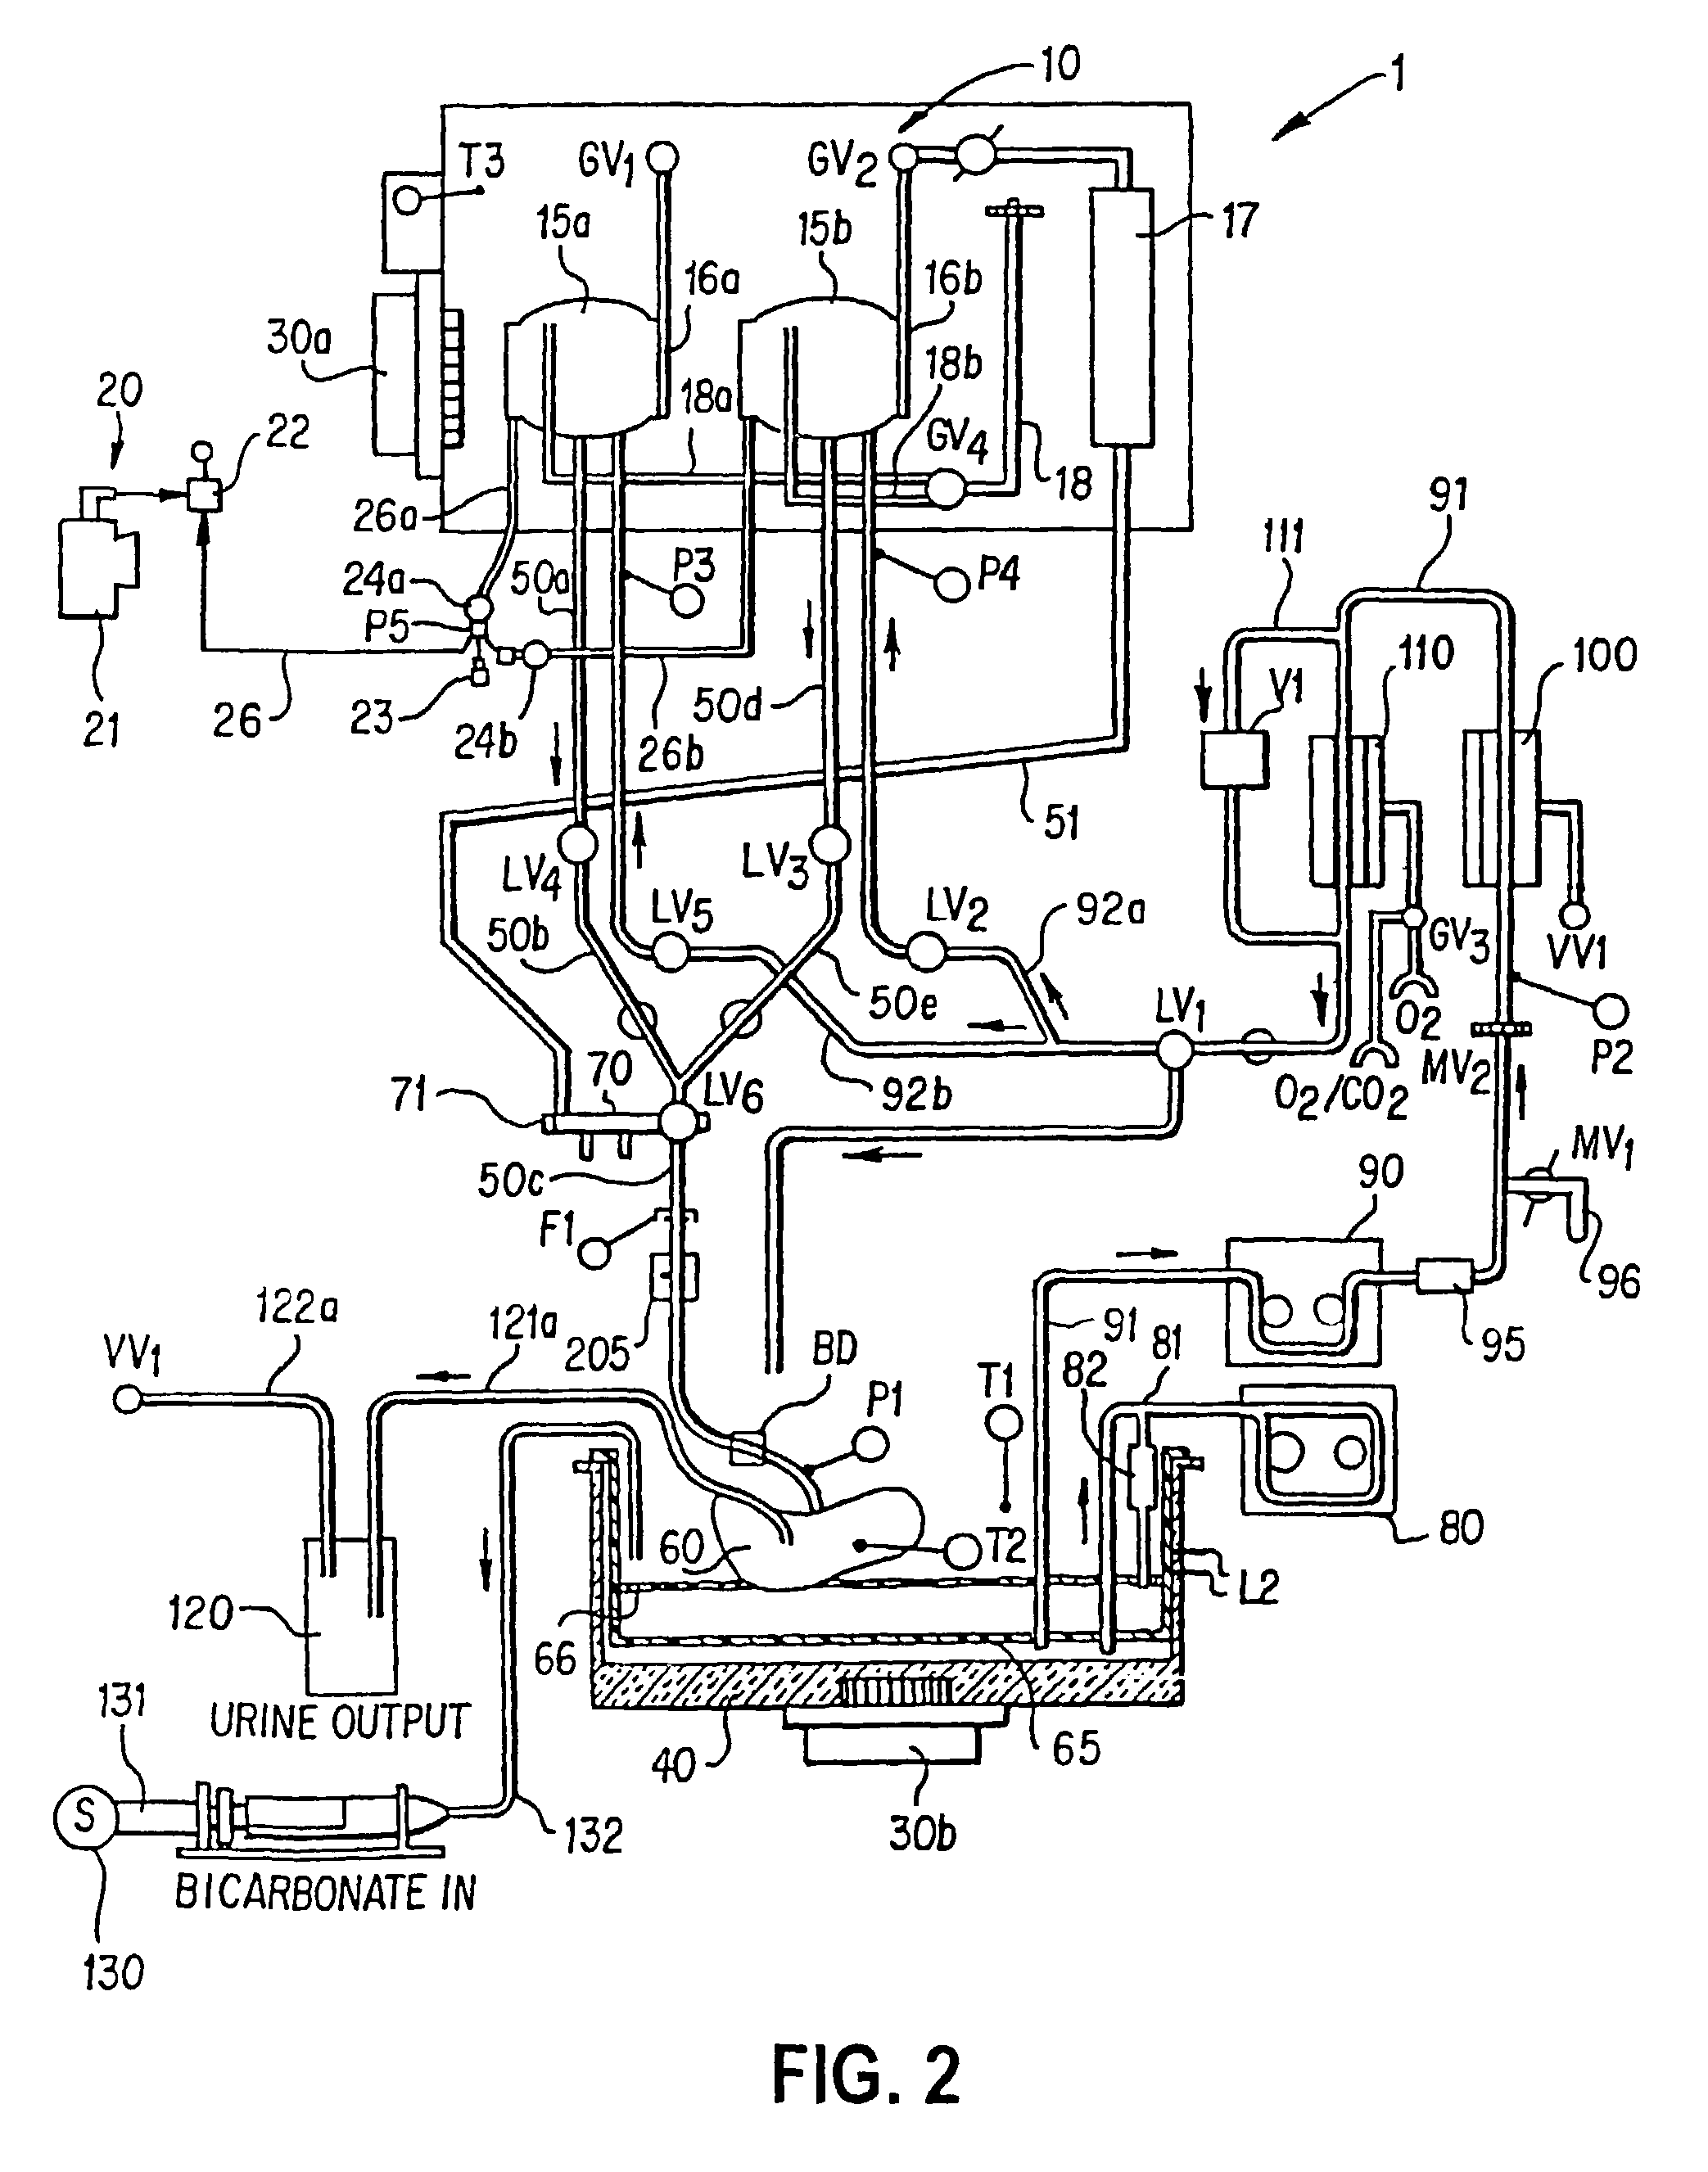 Method and apparatus for pressure control for maintaining viability of organs